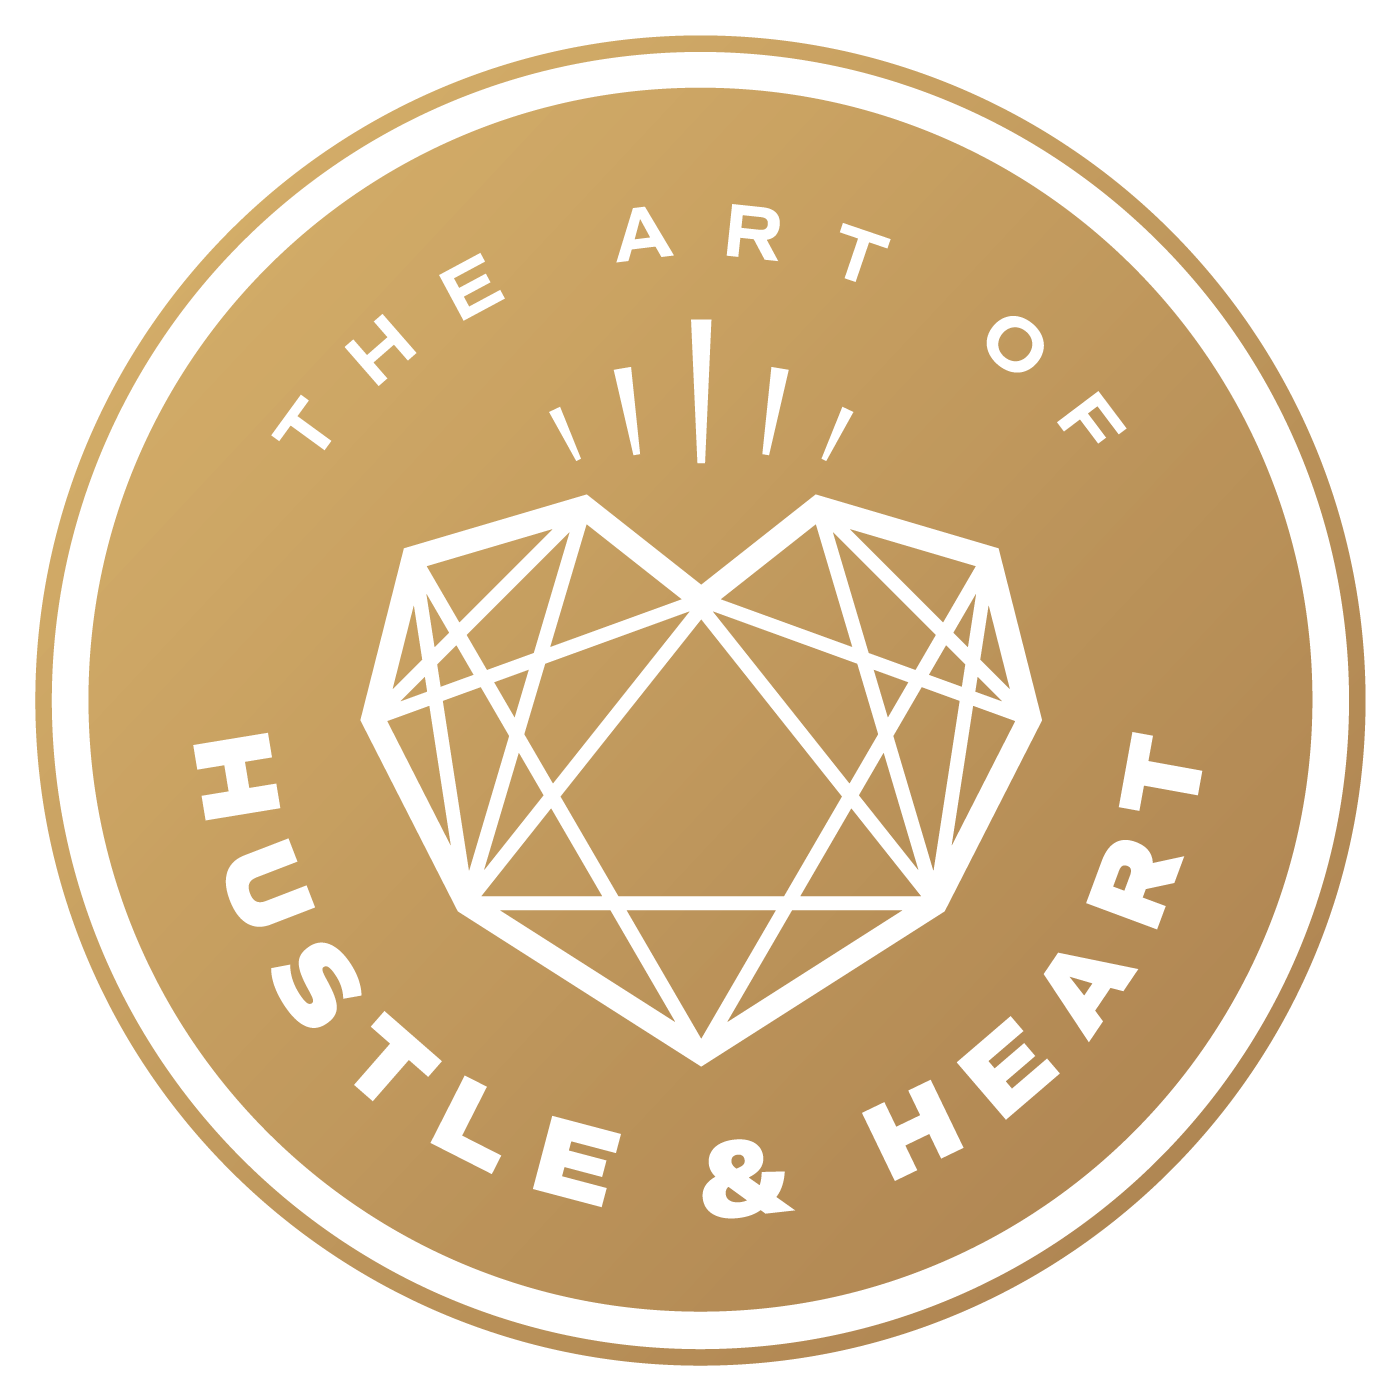 The Art of Hustle and Heart